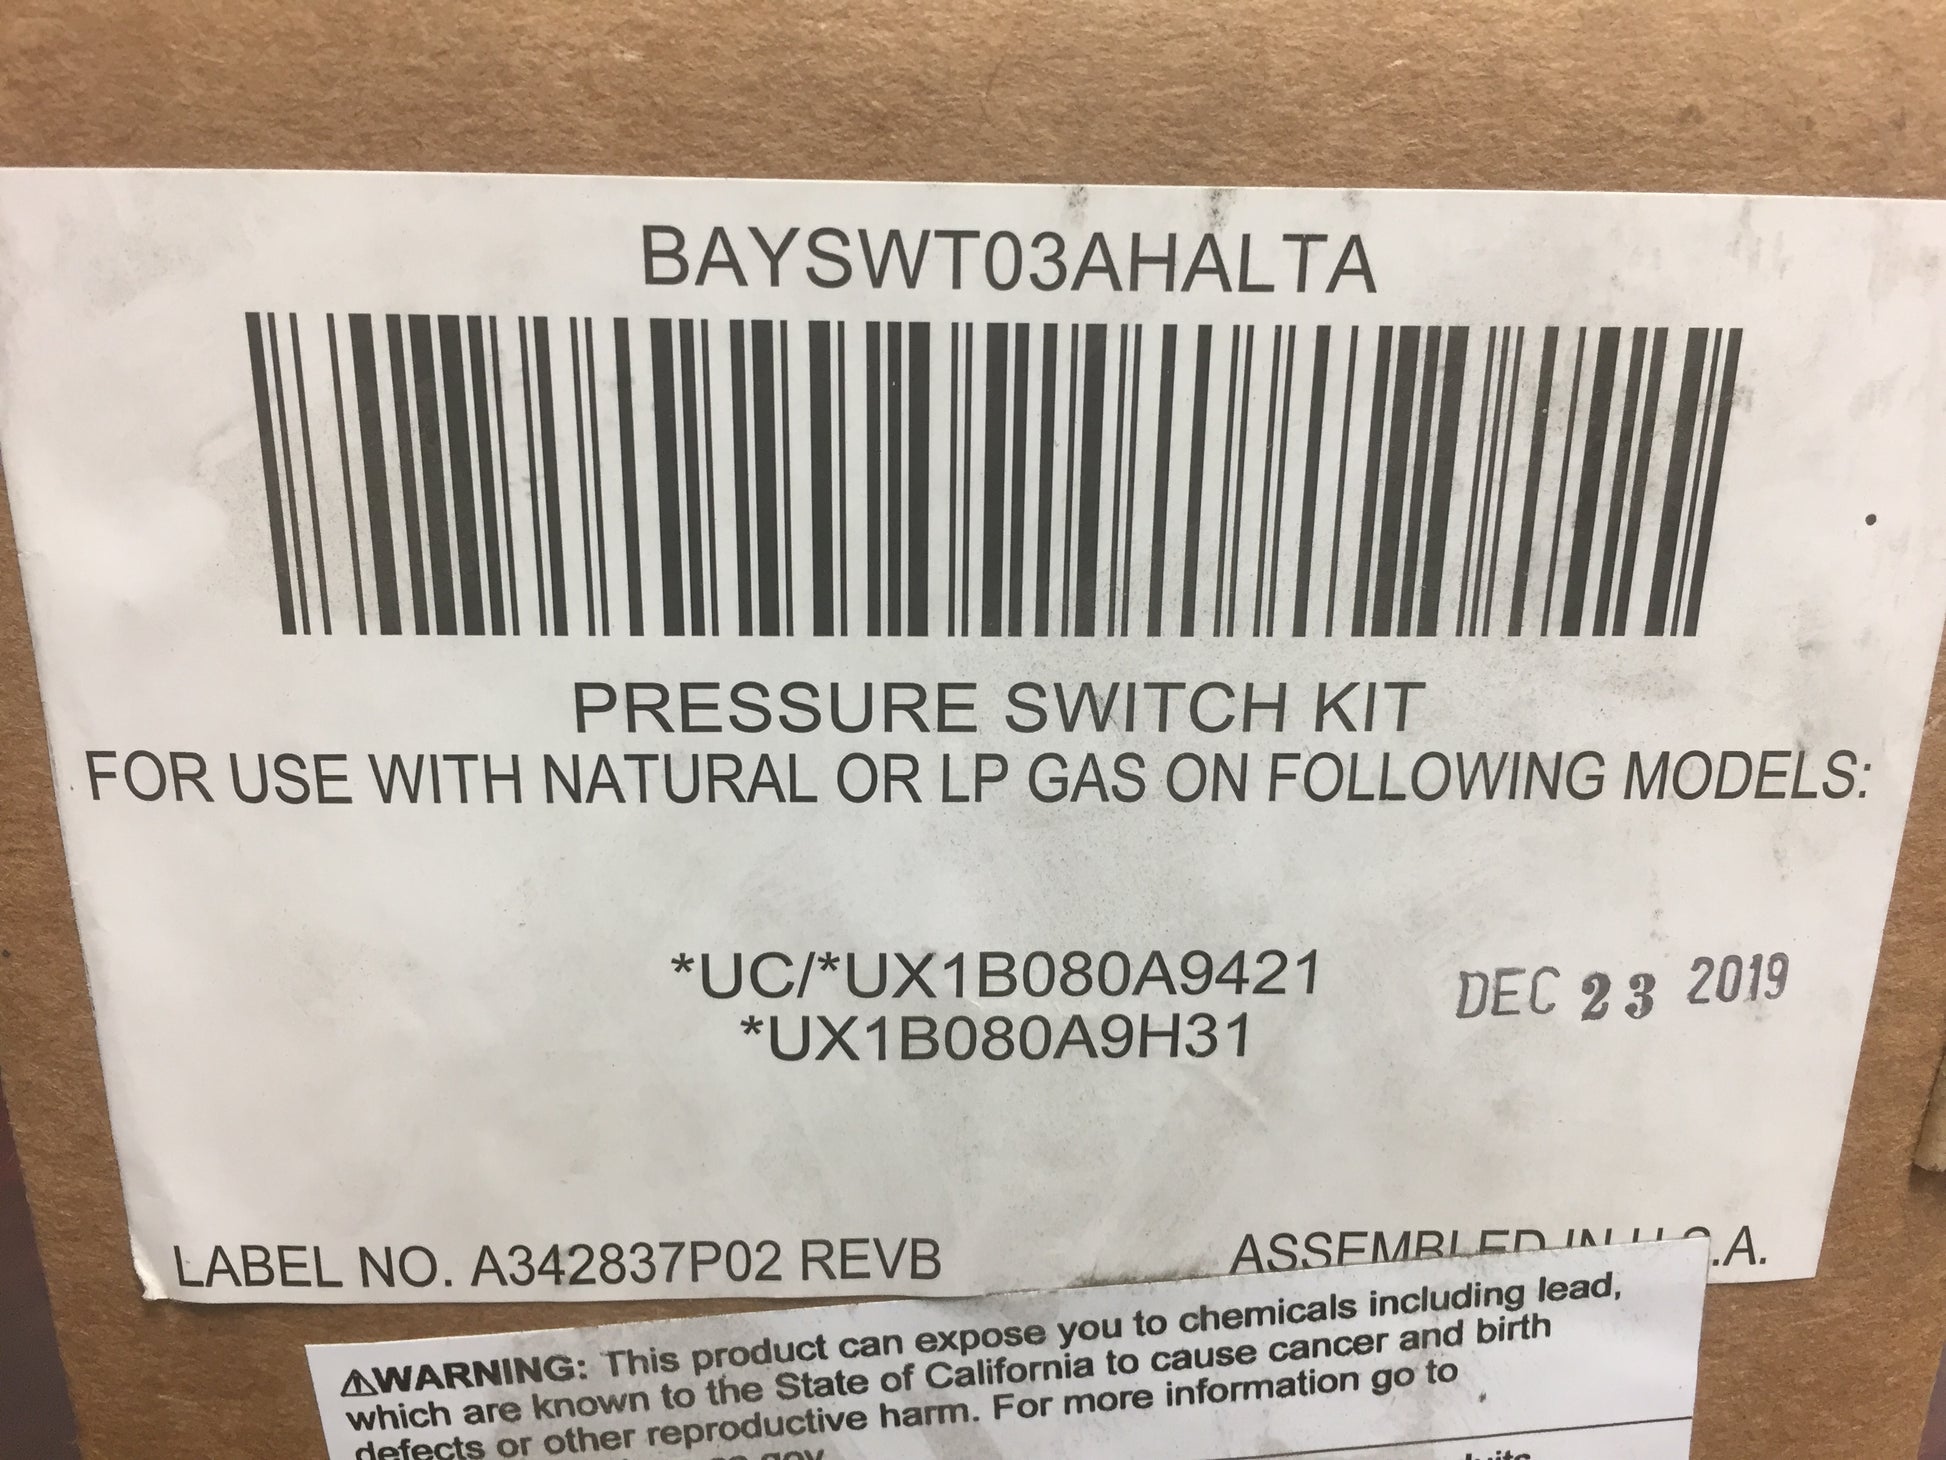 HIGH ALTITUDE PRESSURE SWITCH KIT